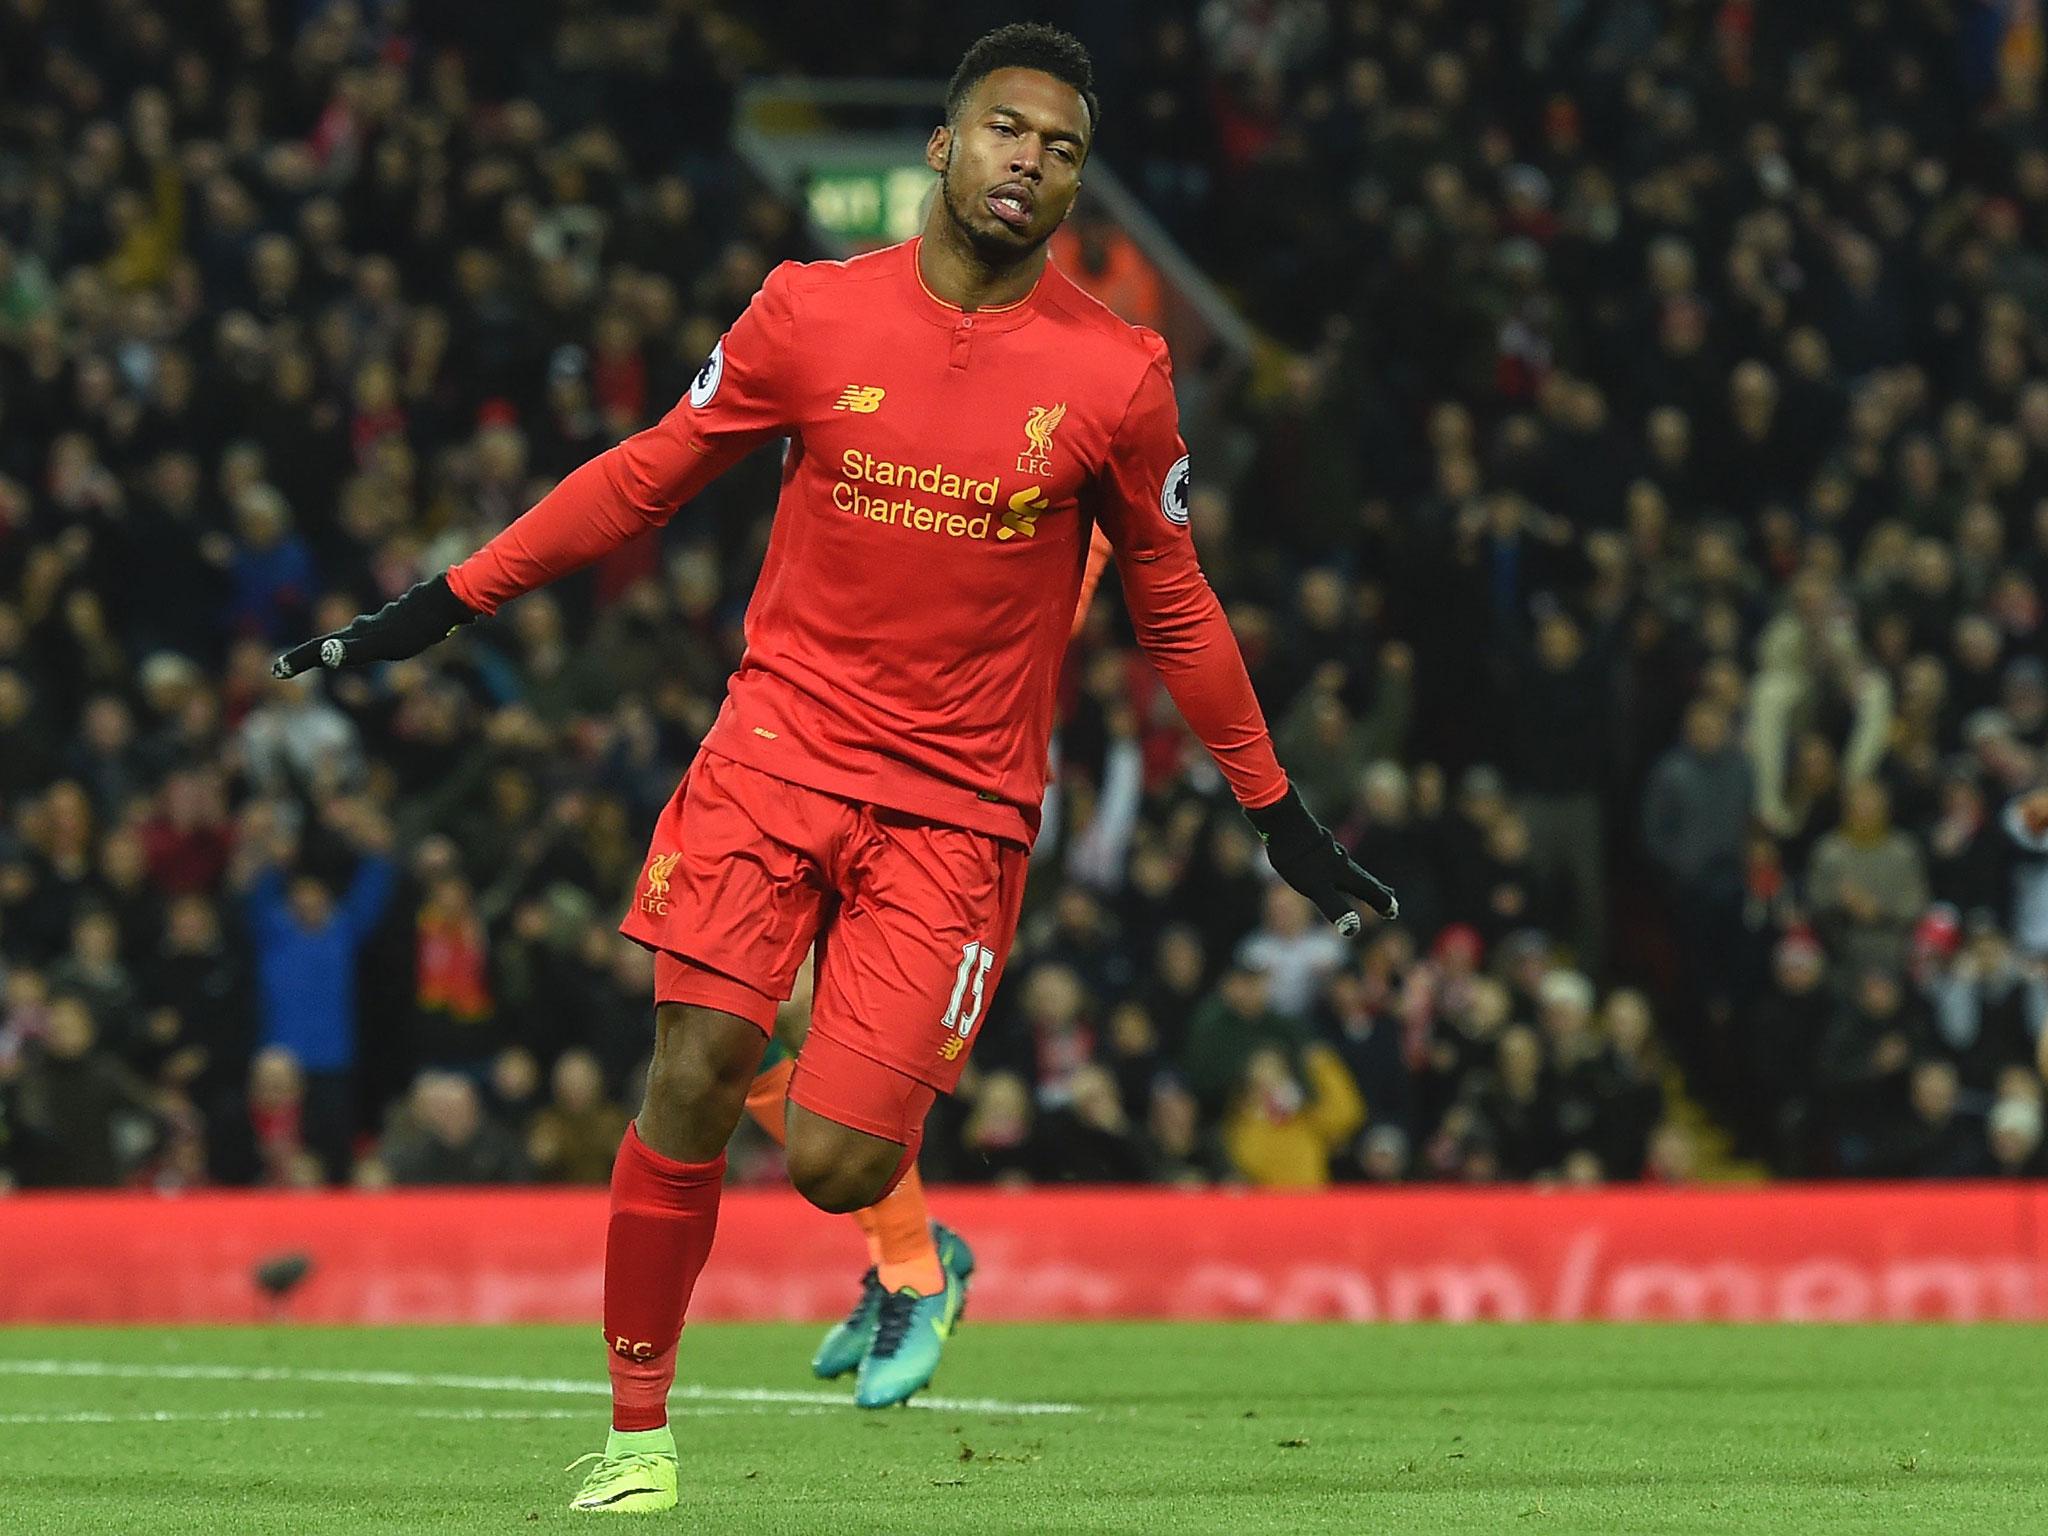 Daniel Sturridge will get another chance to impress by Jurgen Klopp in Liverpool's EFL Cup clash at Southampton